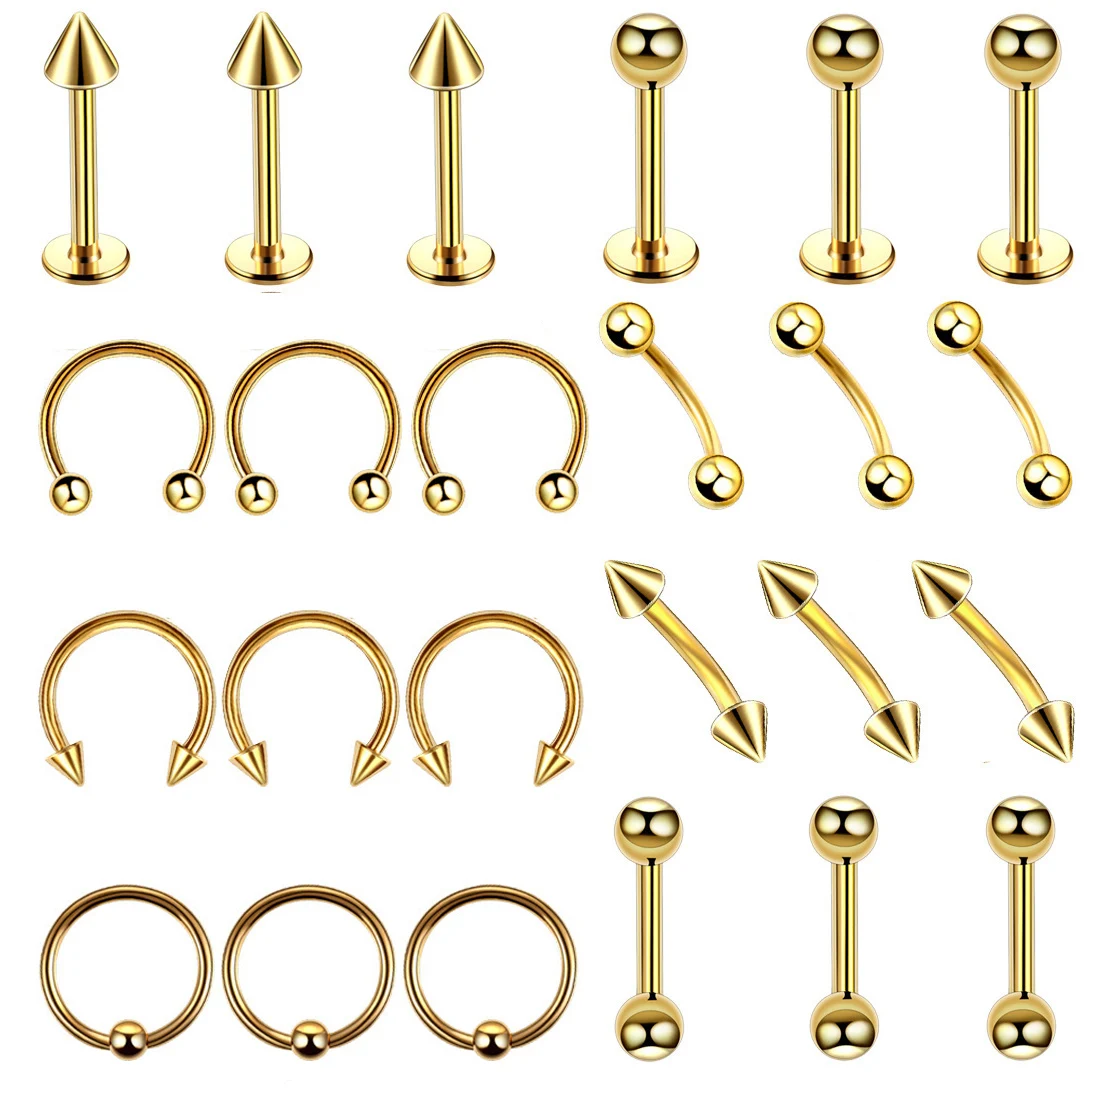 24PC Set Surgical Stainless Steel Body Piercing Jewelry Bulk Nose Ring Tongue Bar Stud Earring Eyebrow Labret Horseshoe Lot Pack